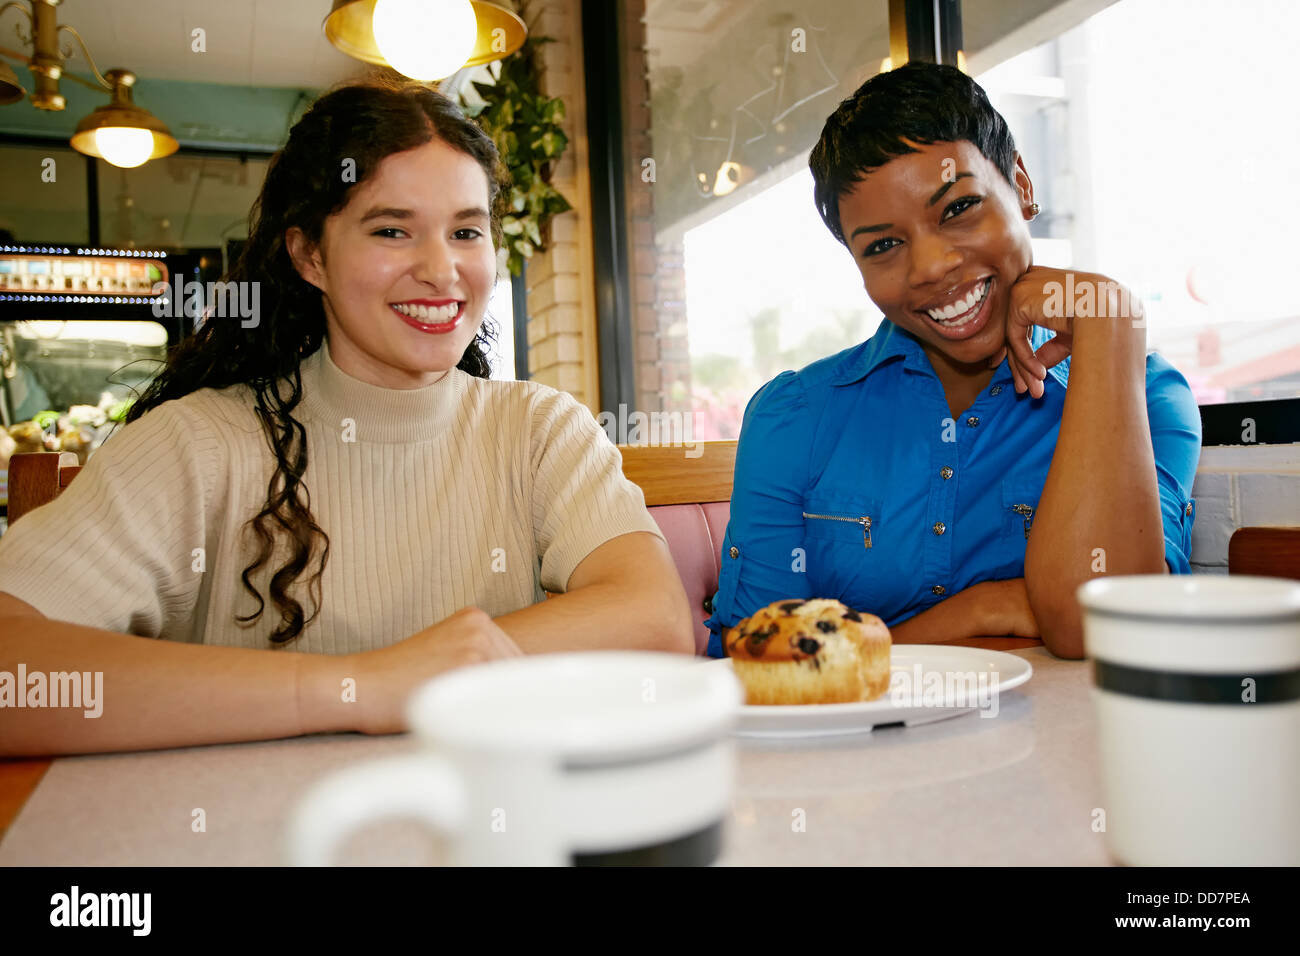 Women laughing in restaurant booth Stock Photo